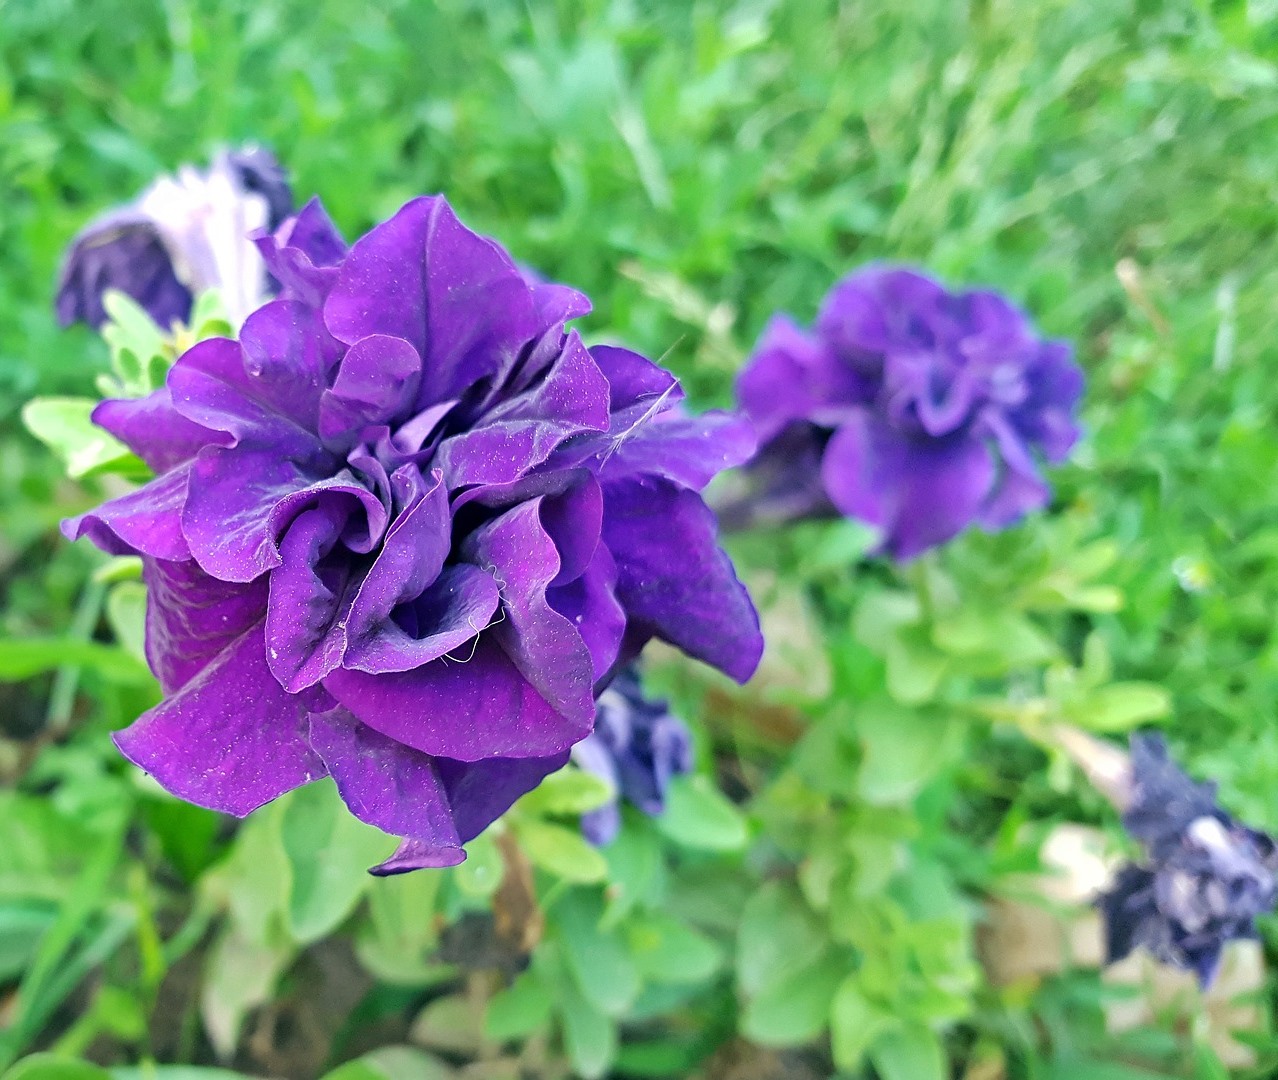 Ruffled double grandiflora petunia of purple flowers with background of green foliage.